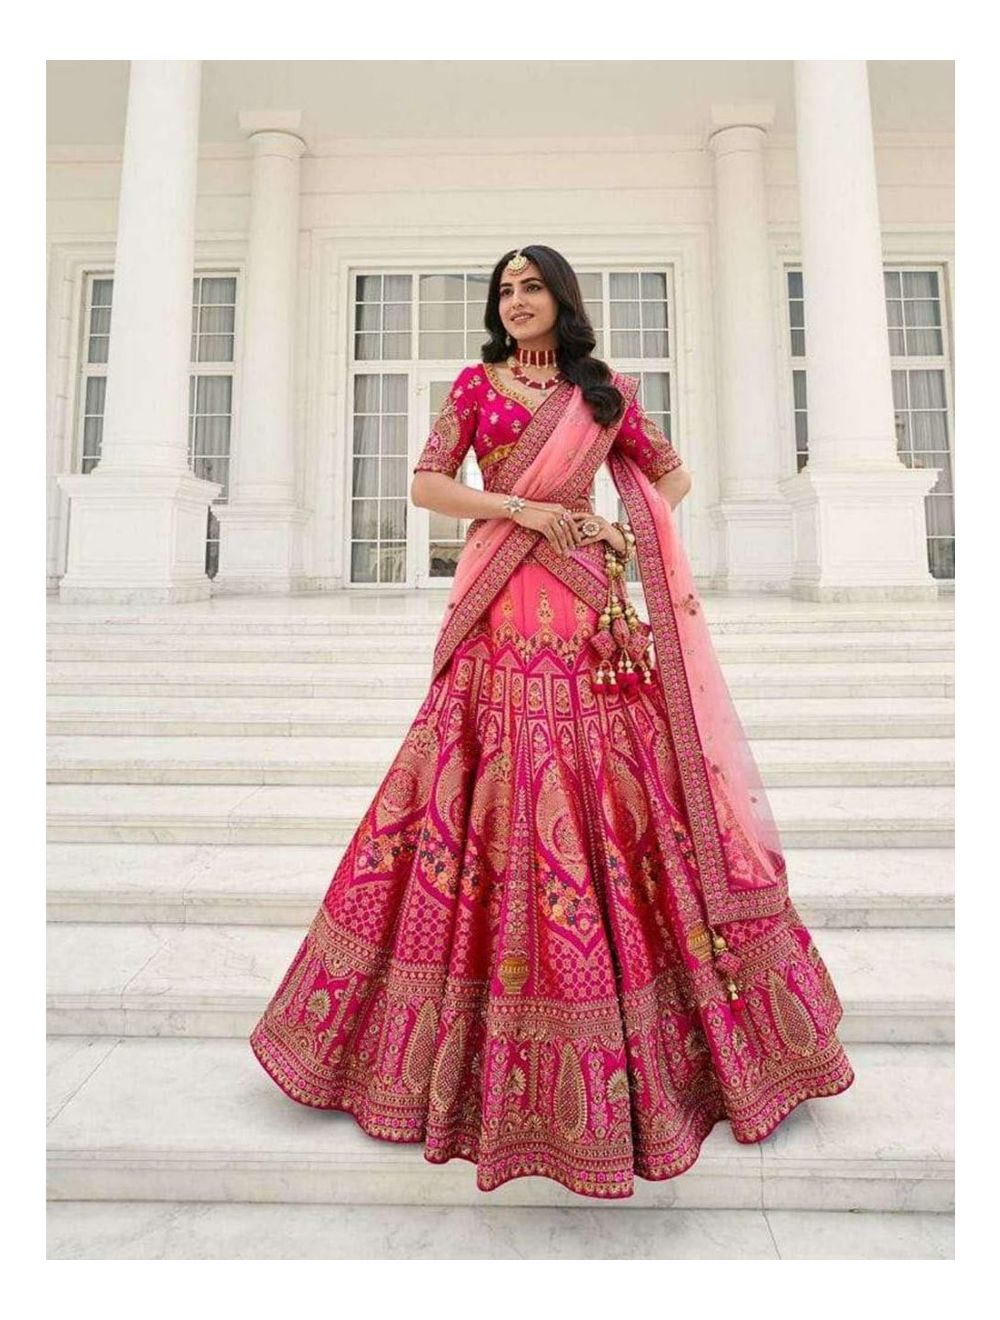 13 Reasons Why You Should Rent a Lehenga Instead of Buying One